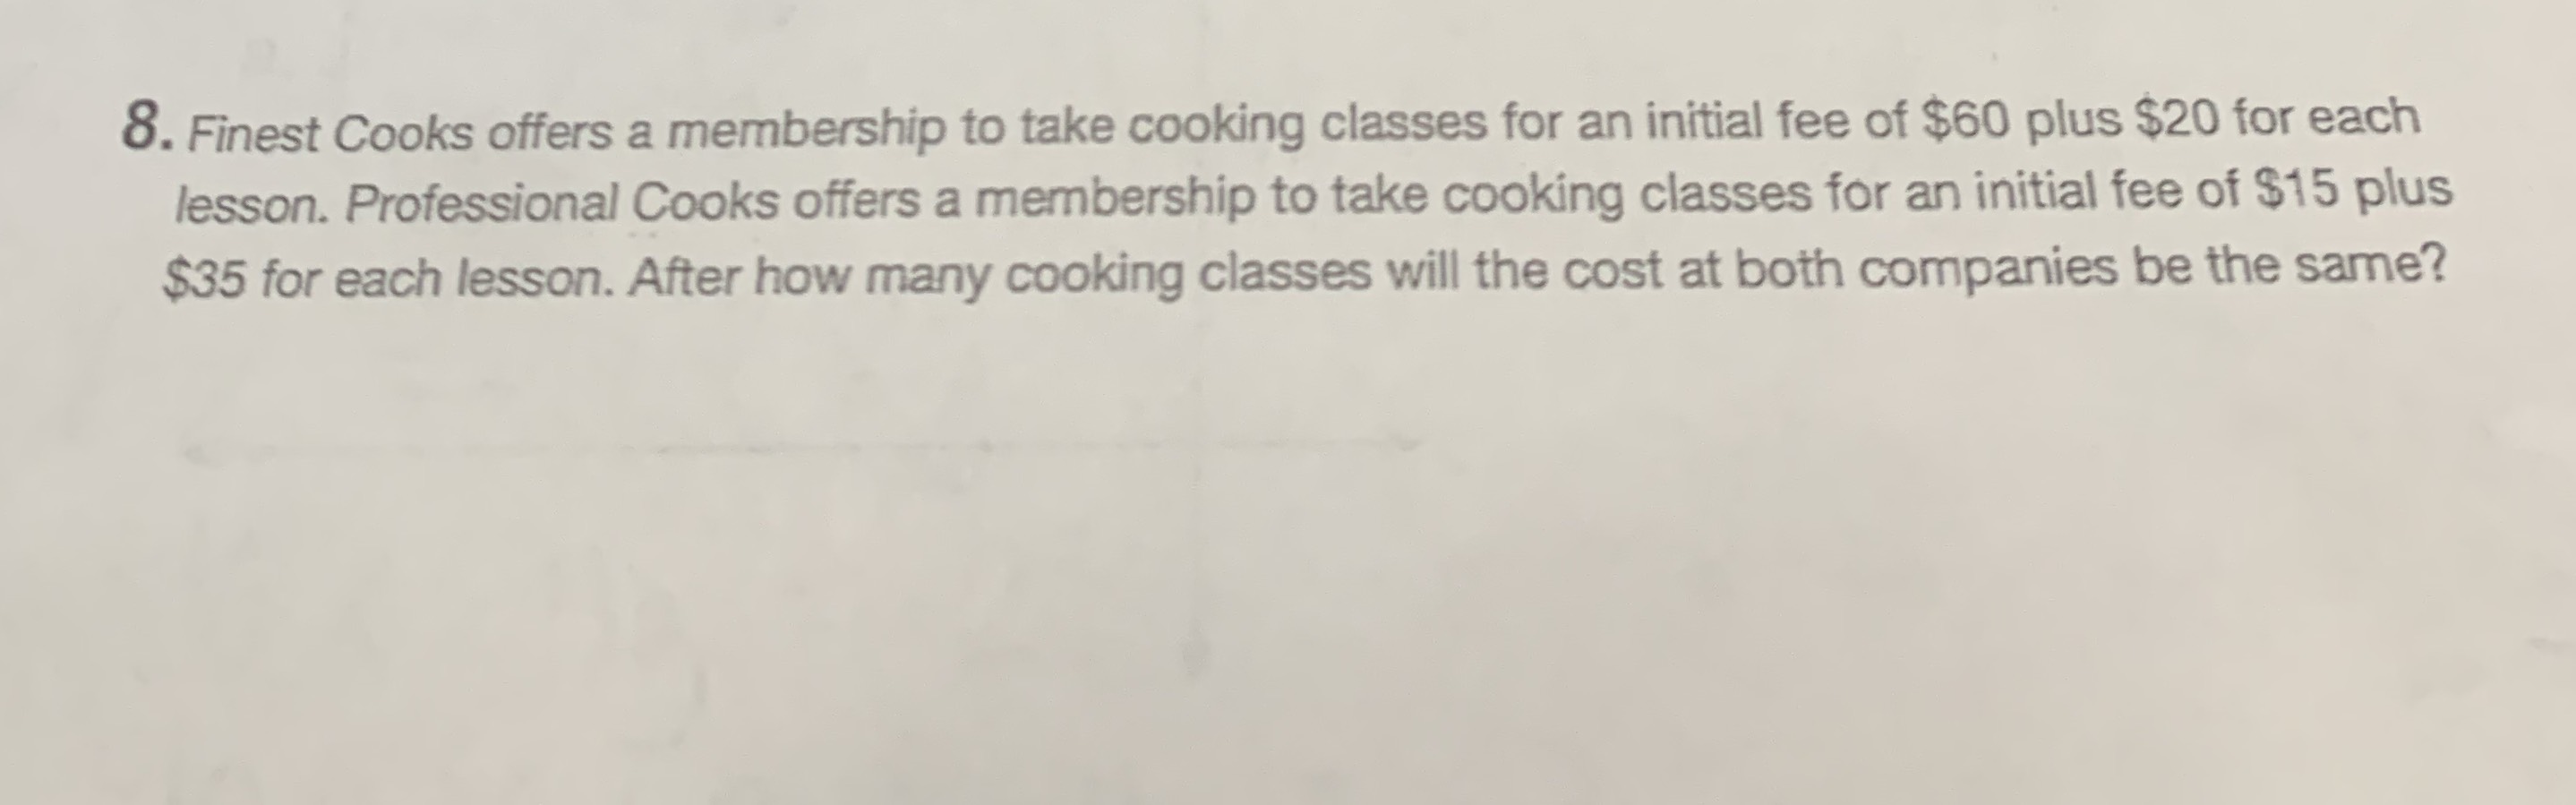 8. Finest Cooks offers a membership to take cookin...